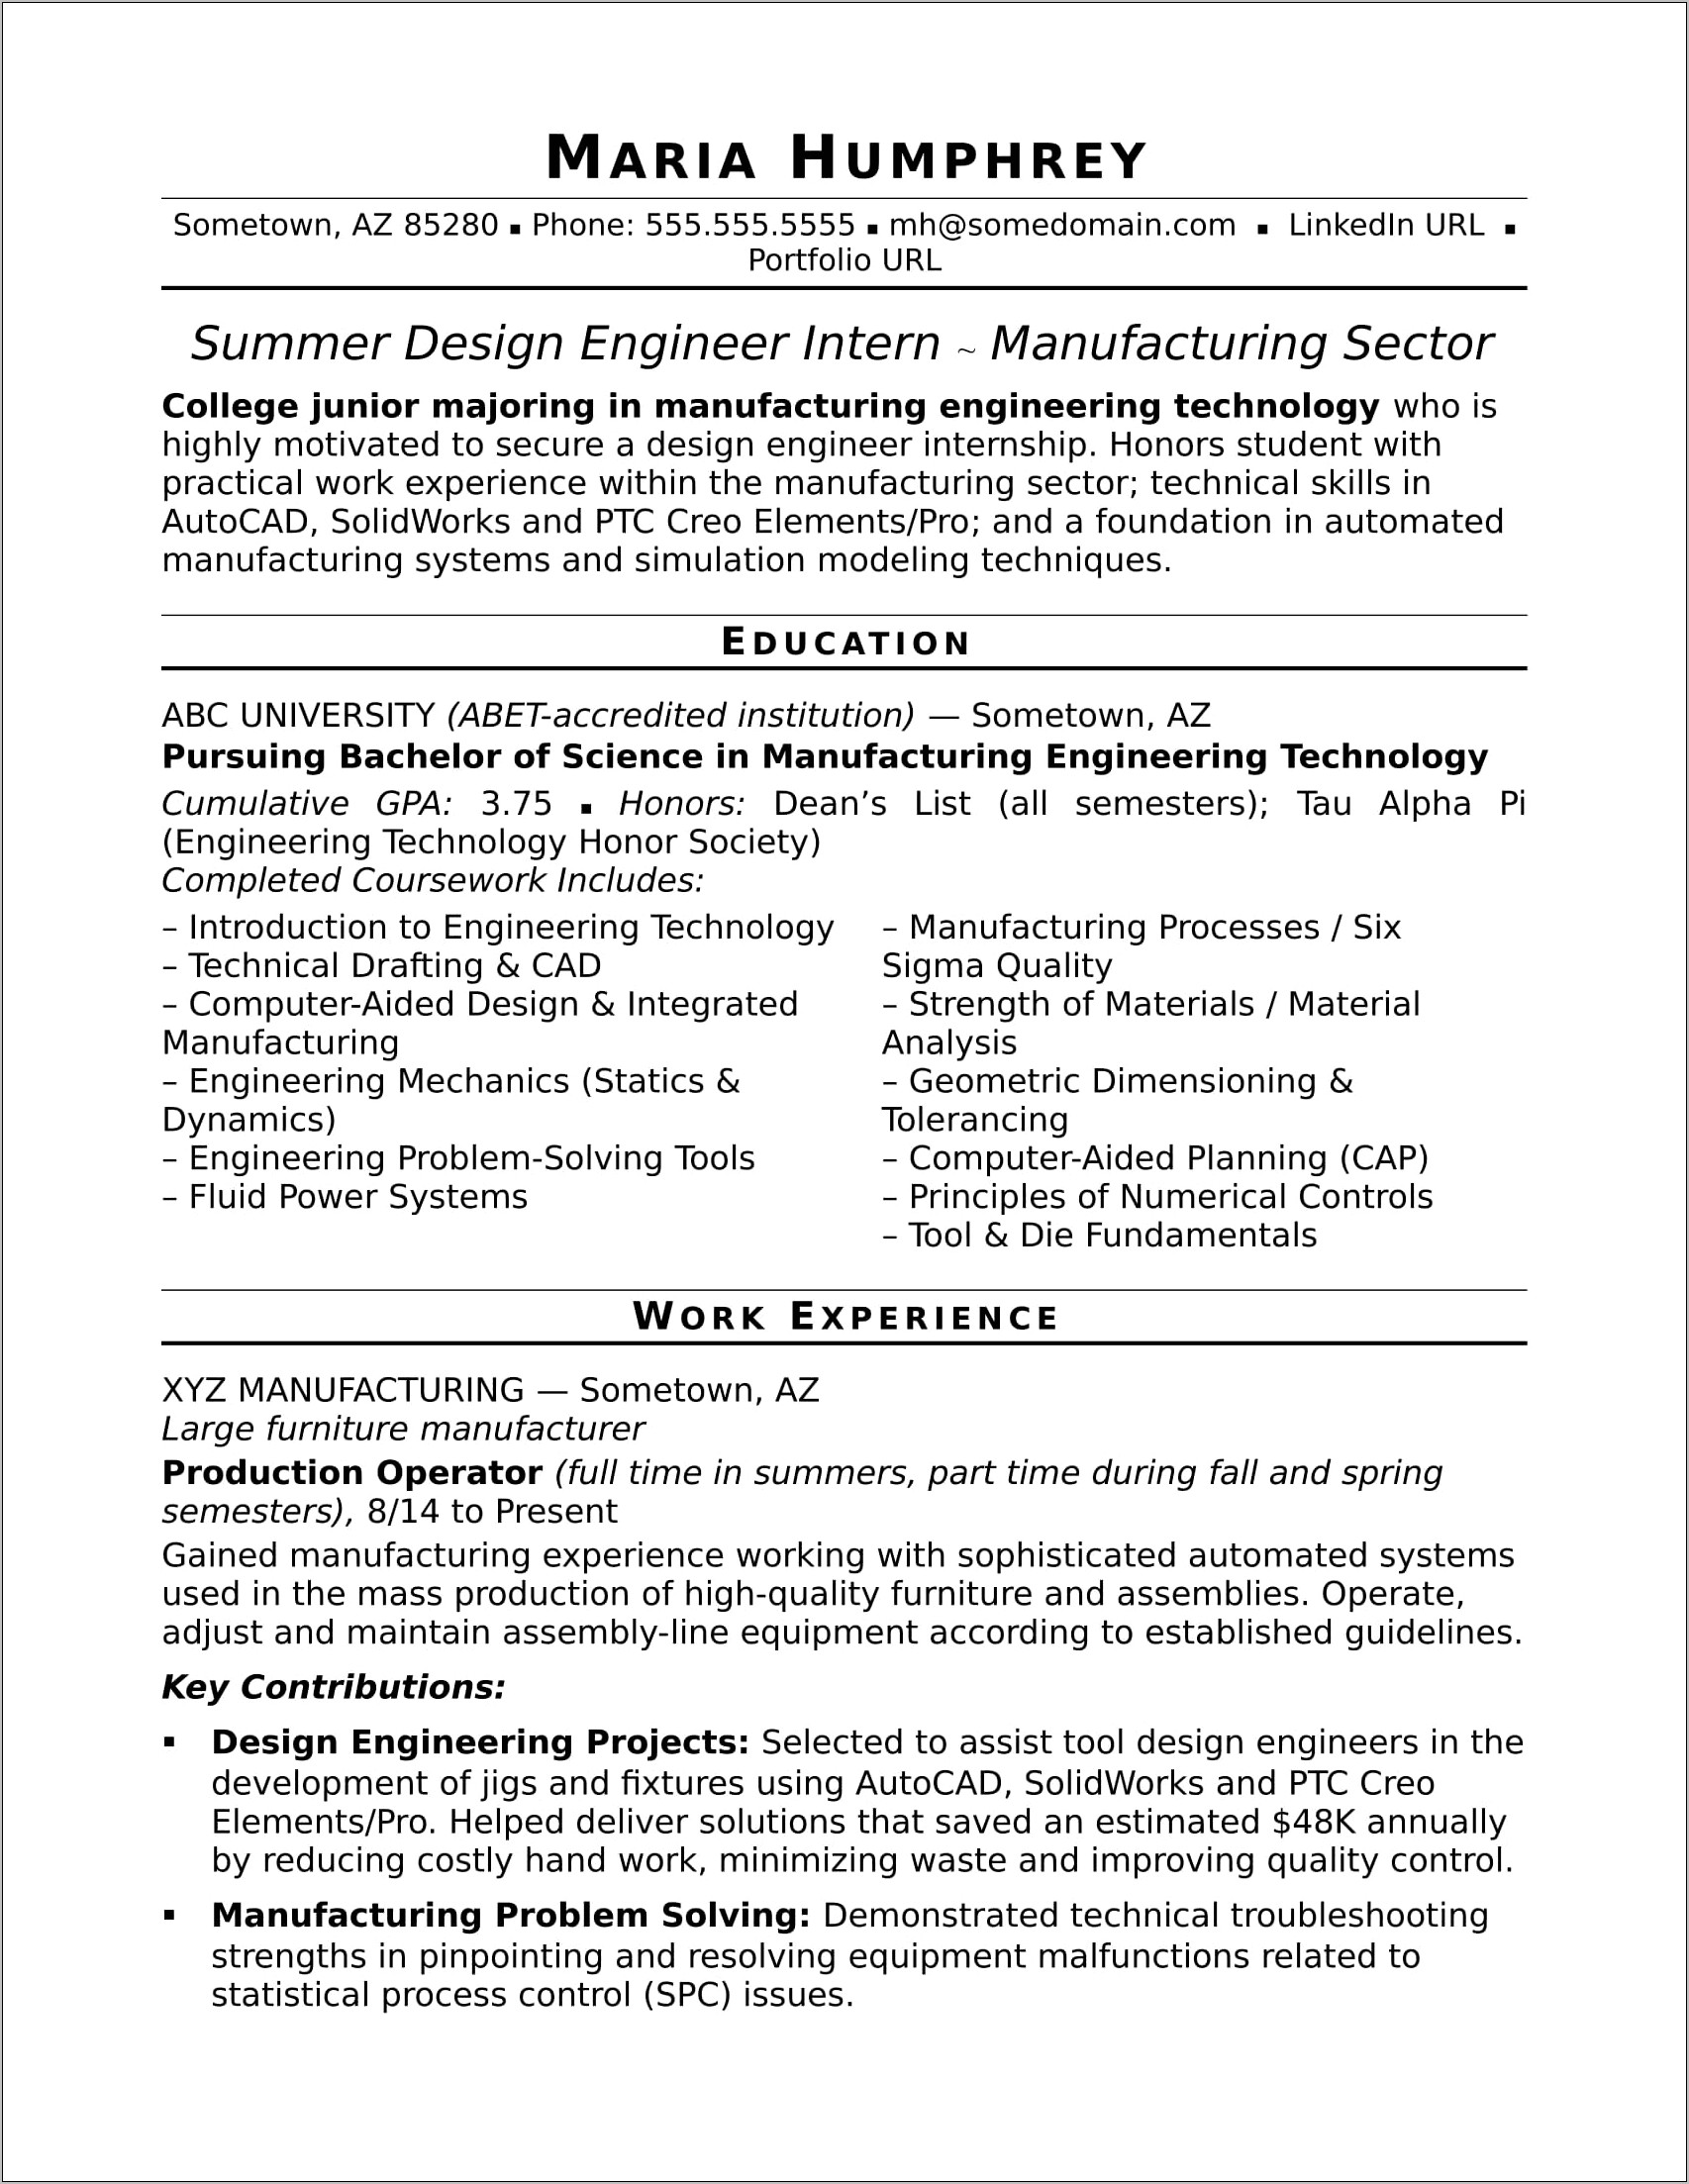 Best Resume Layout Design For Automated Systems